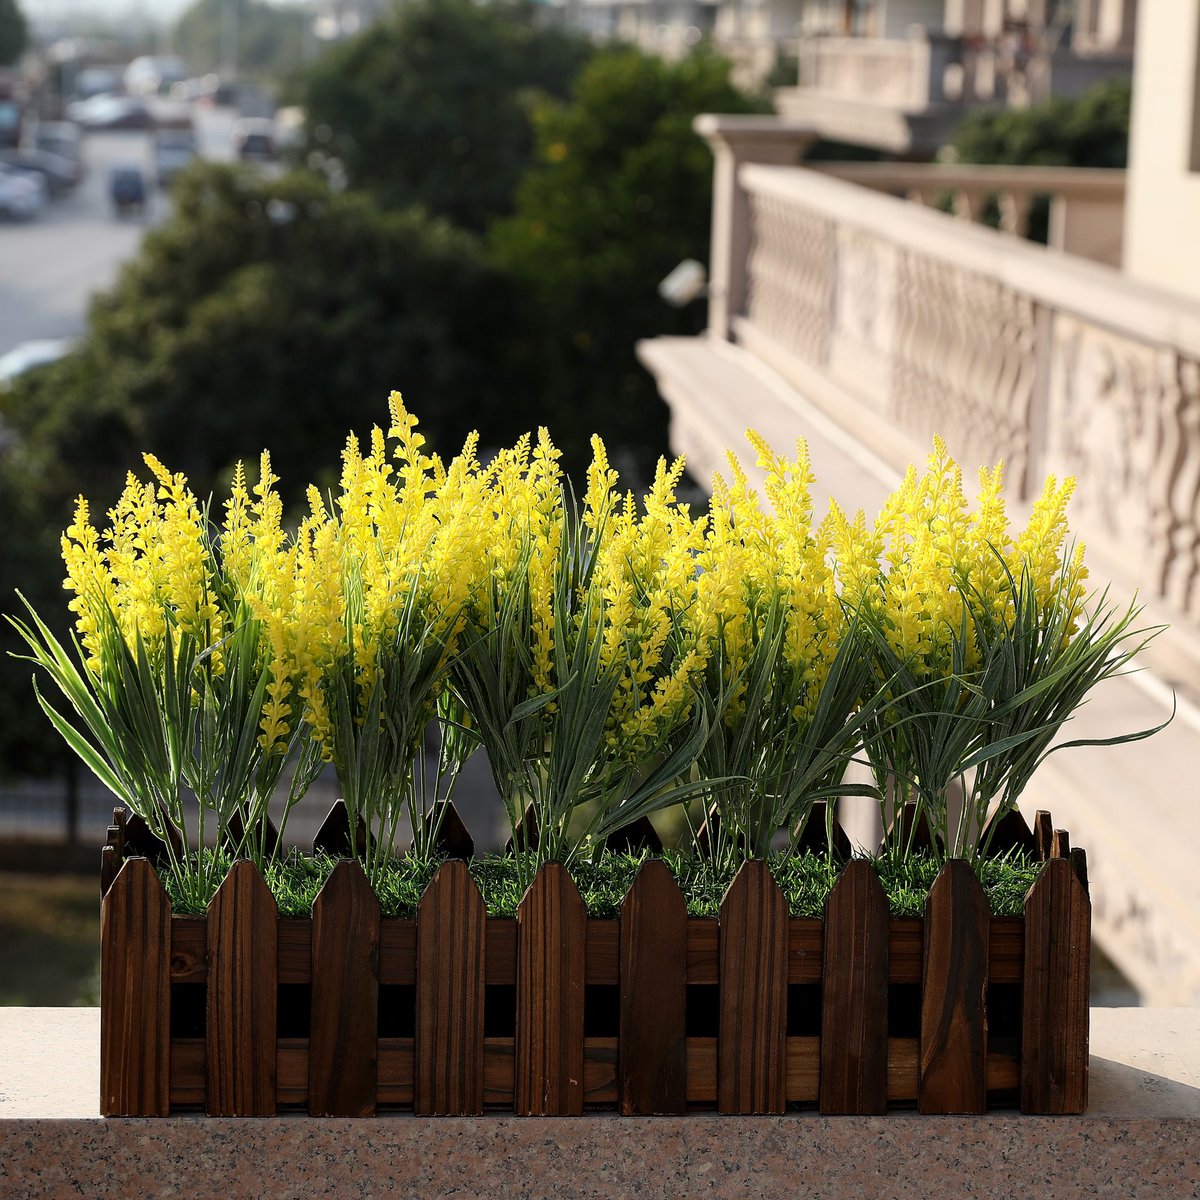 Transform your balcony into a vibrant oasis with these stunning yellow lavender faux flowers.

#grandverde
#lavenderflowers
#yellowflowers
#fauxflowers
#artificialflowers
#balconydecor
#natureinspired
#vibrantflowers